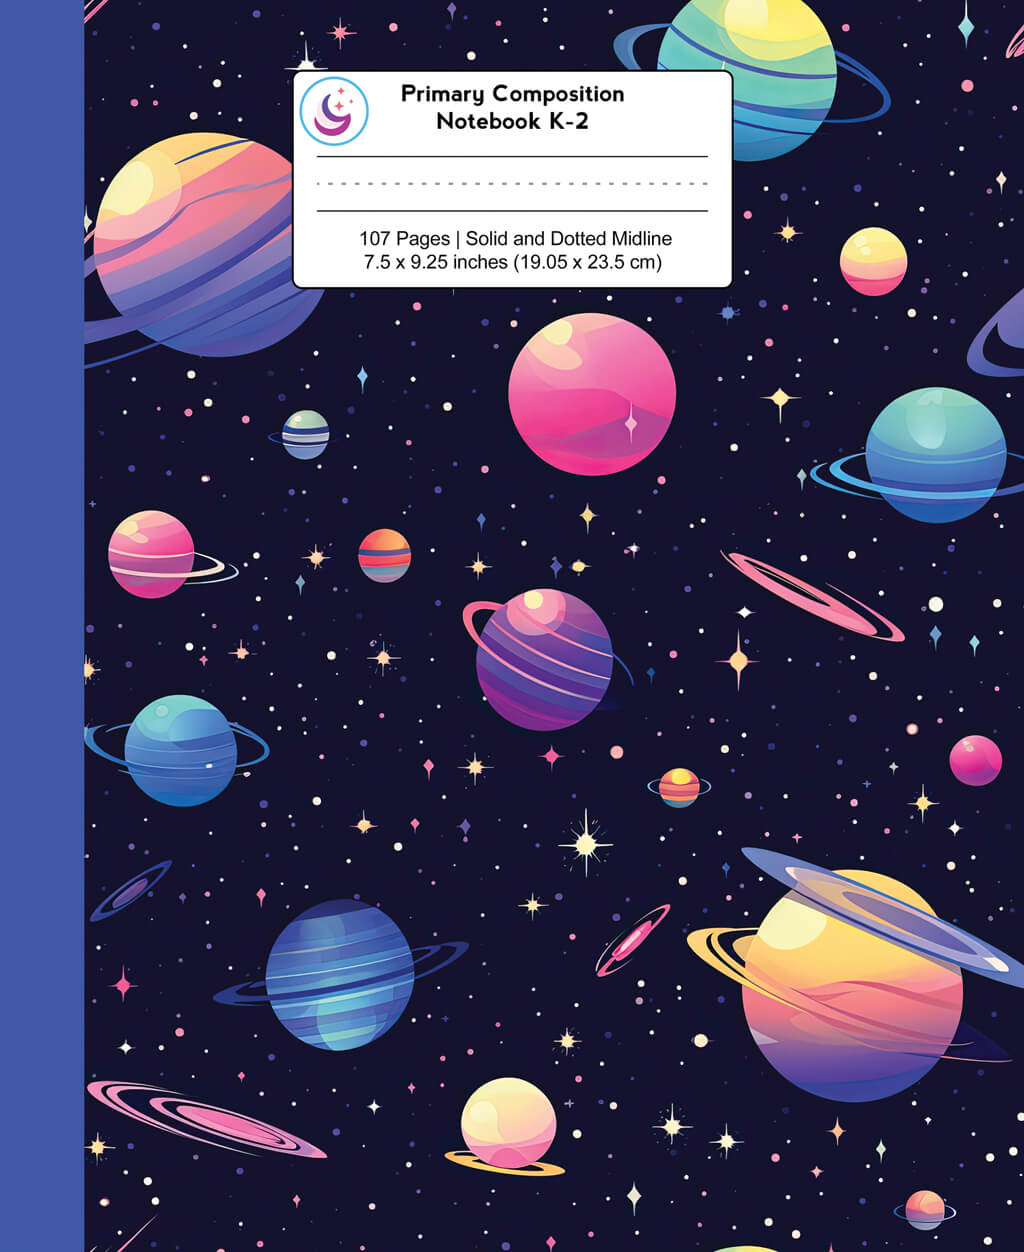 Primary Composition Notebook K-2: Blue and Purple Outer Space Journal